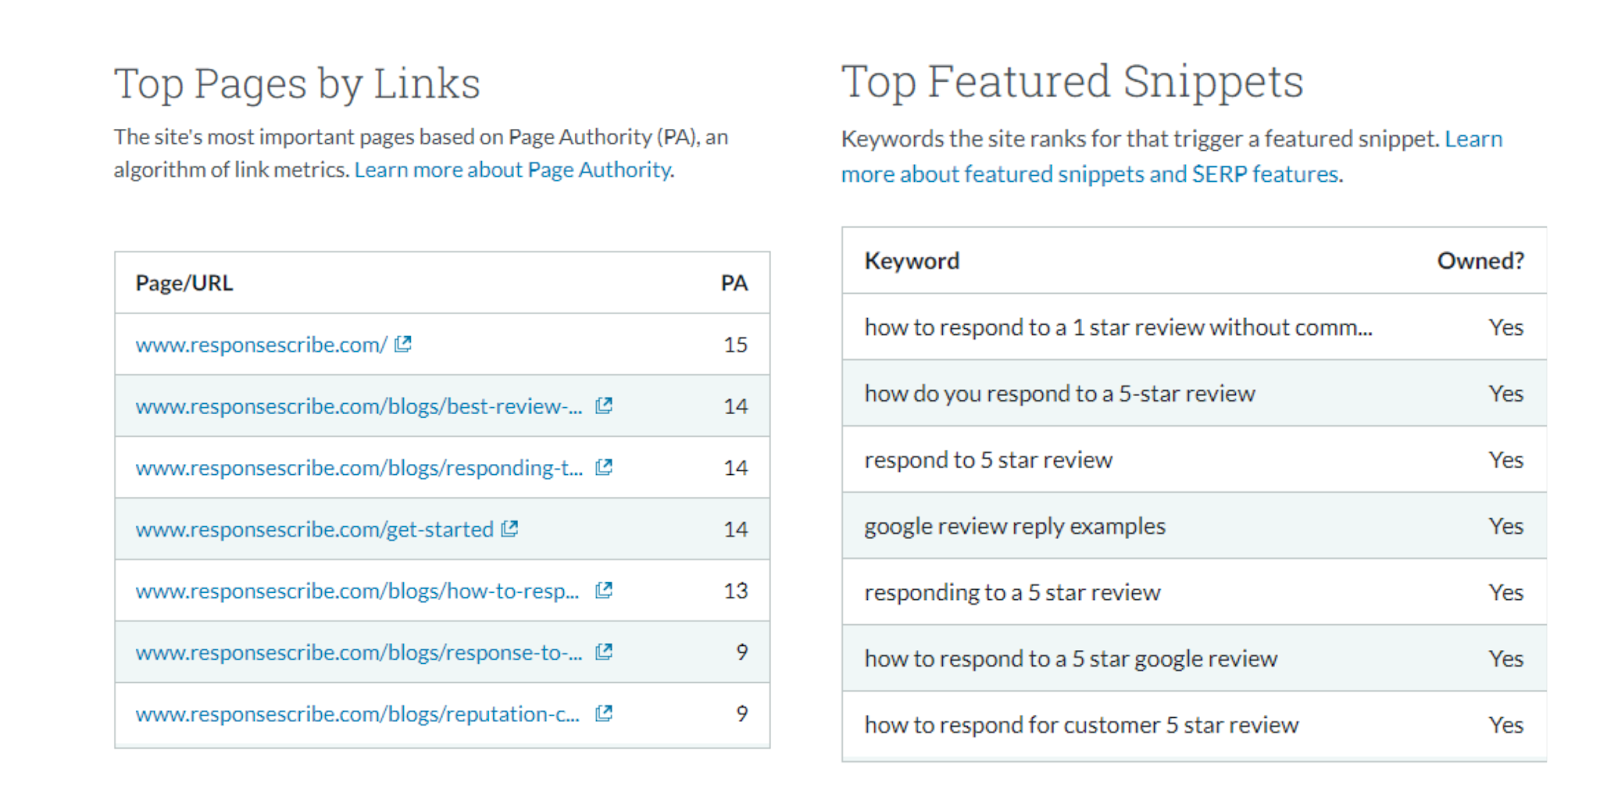 results on page authority and featued snippets for ResponseScribe after 6 months